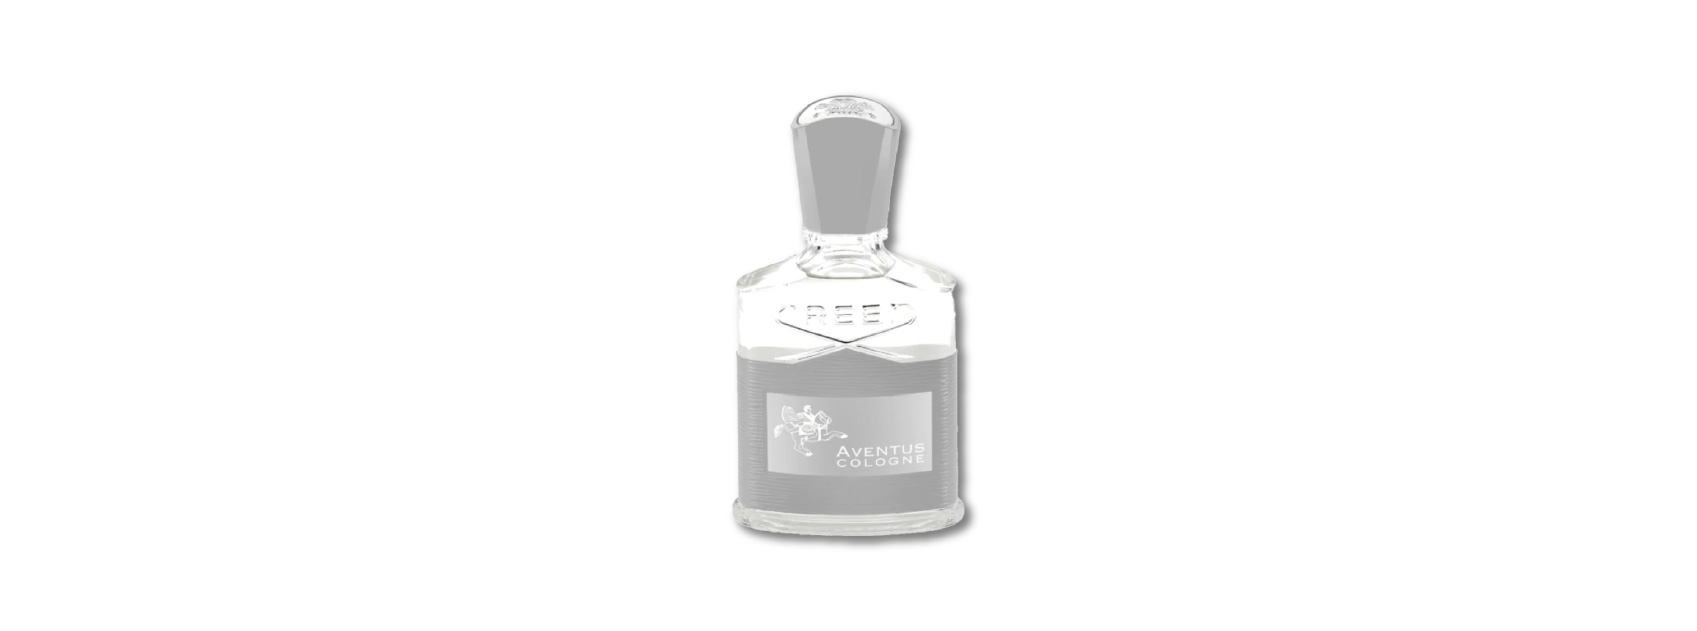 bottle of aventus cologne by creed